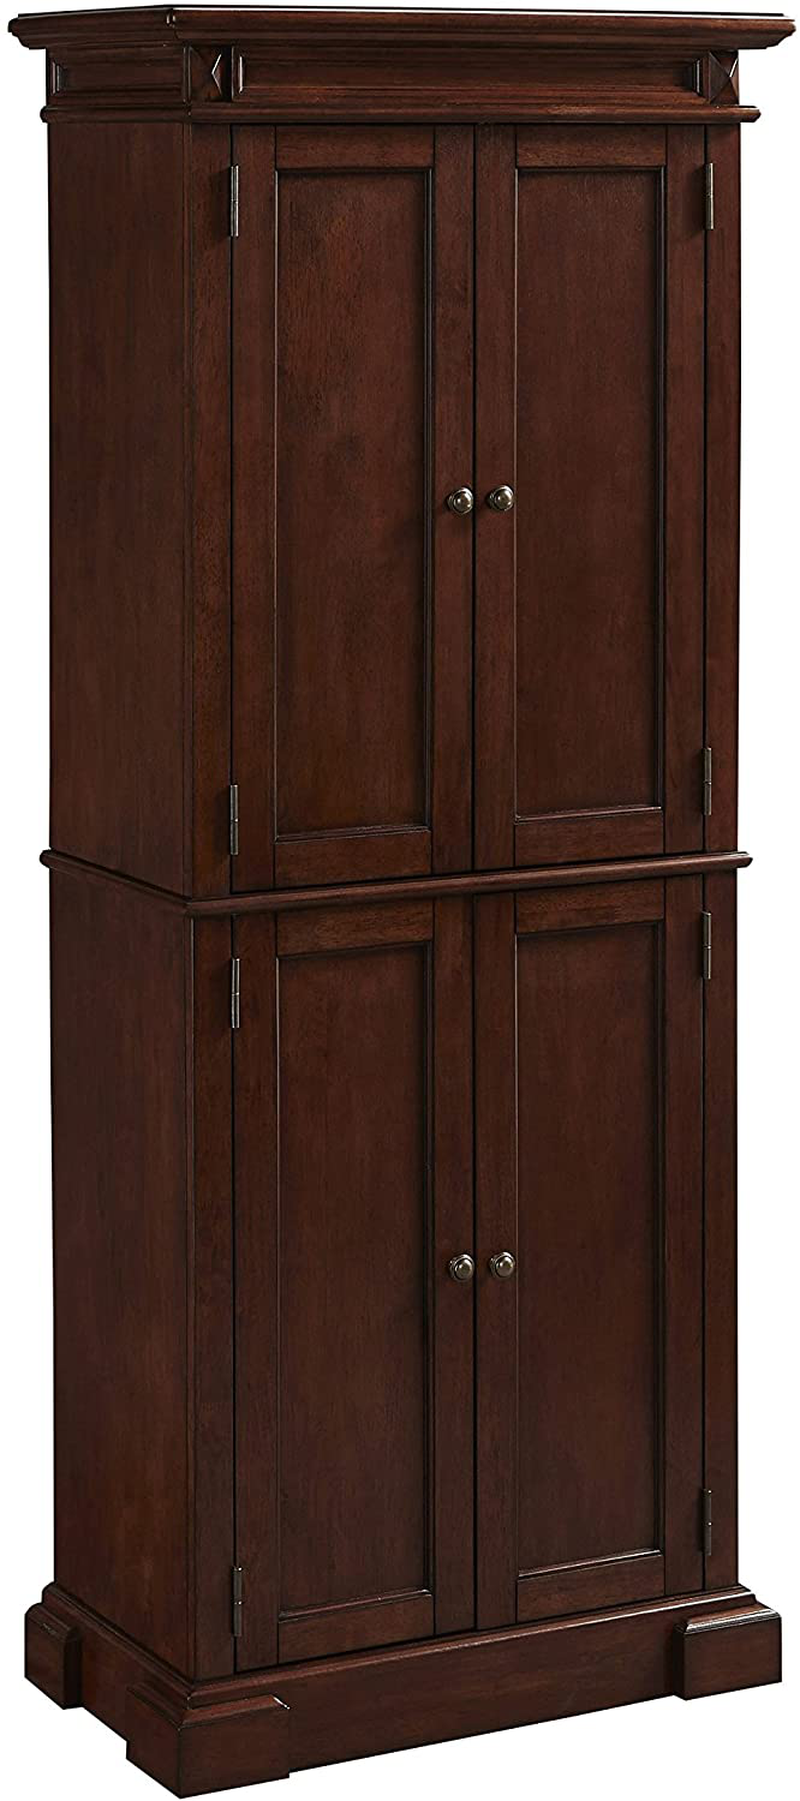 Home Styles Freestanding Americana Kitchen Pantry in Cherry Finish Constructed of Hardwood Solids with Four Storage Doors, Four Adjustable Shelves Home & Garden > Kitchen & Dining > Food Storage Home Styles Cherry  